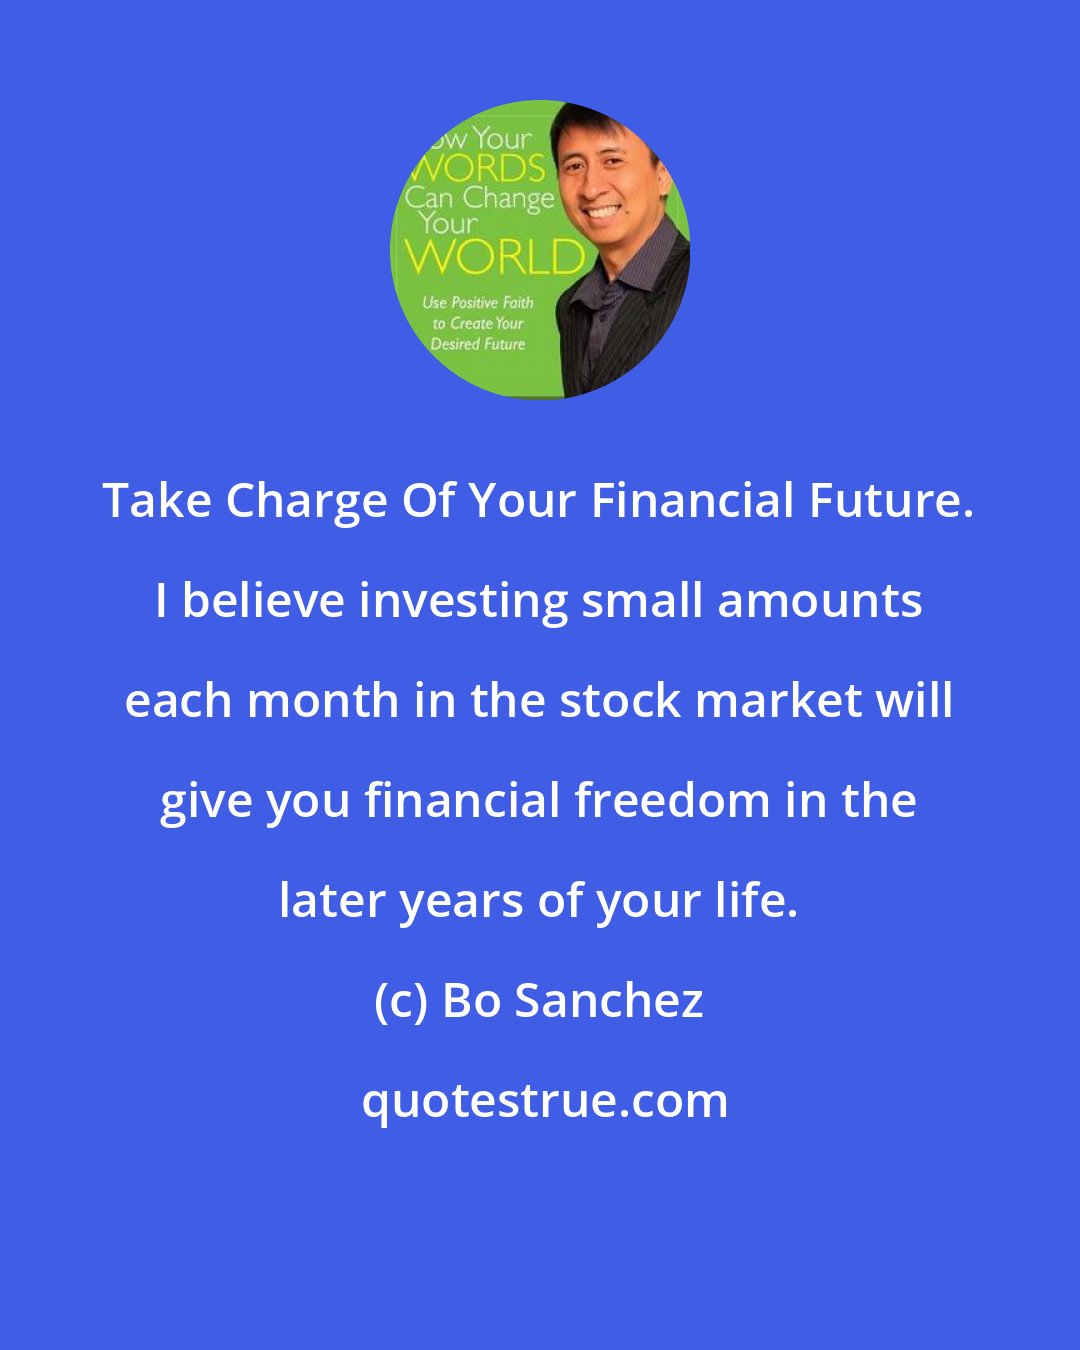 Bo Sanchez: Take Charge Of Your Financial Future. I believe investing small amounts each month in the stock market will give you financial freedom in the later years of your life.